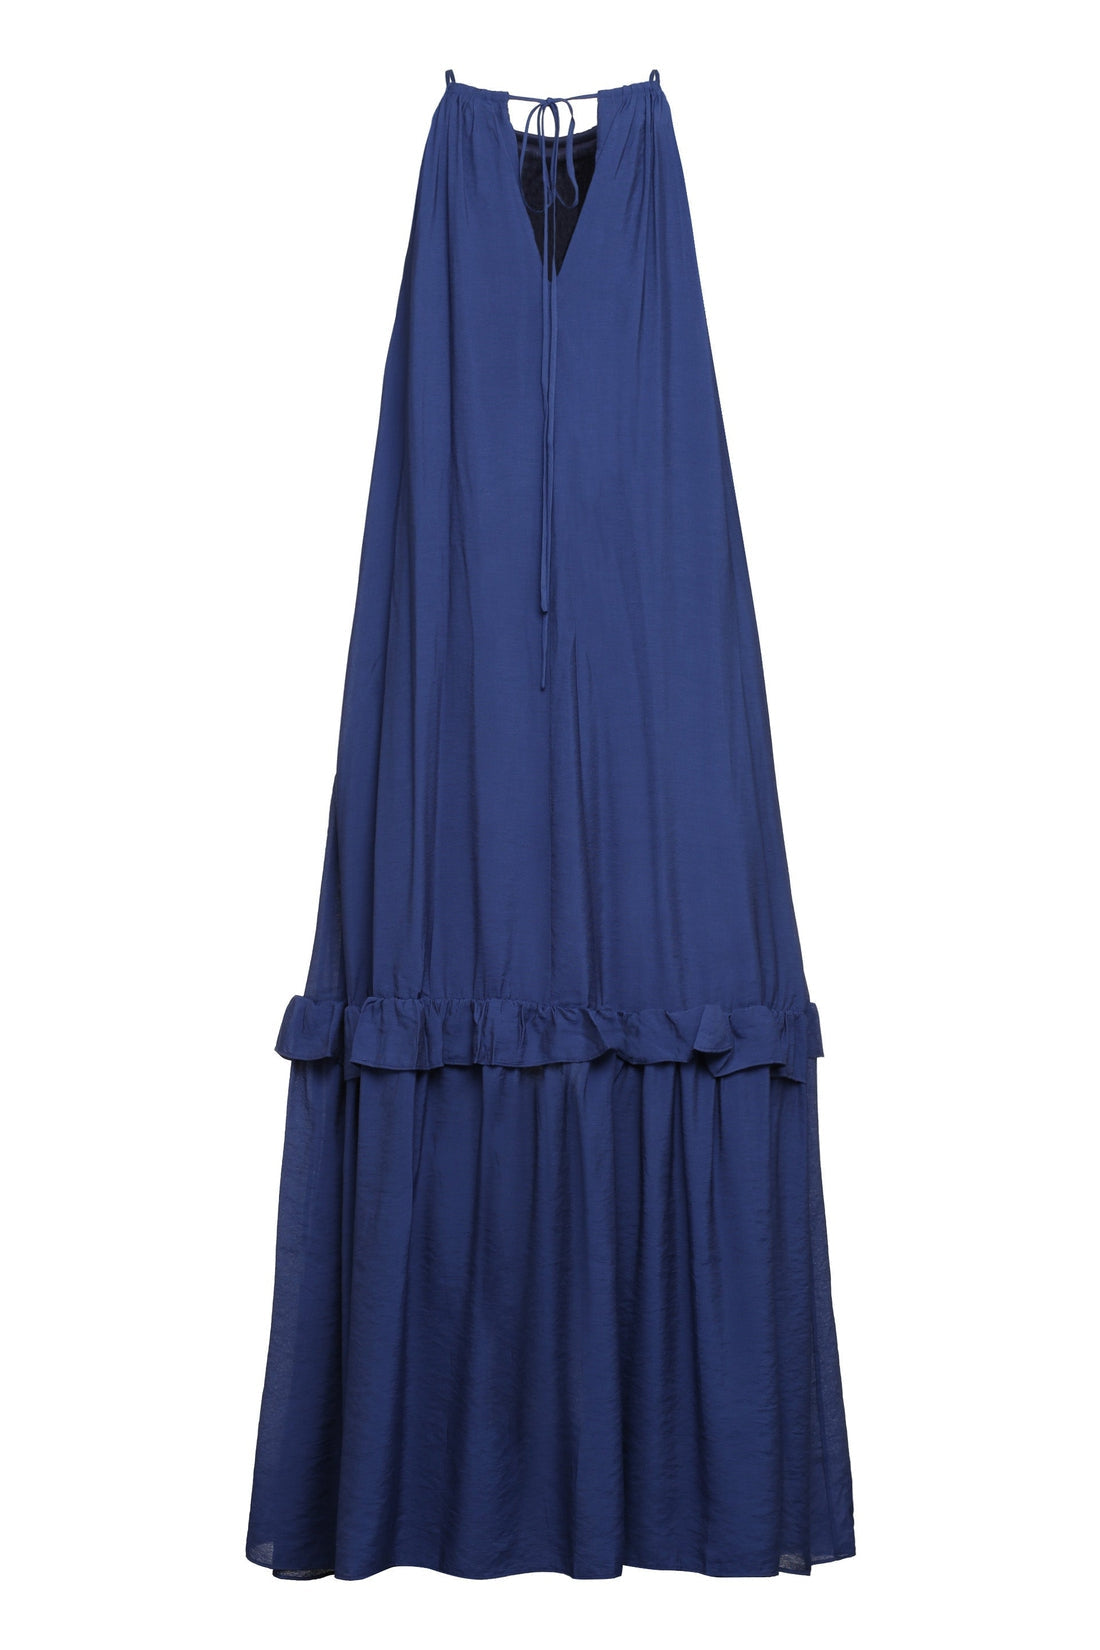 STAUD-OUTLET-SALE-Ina maxi dress-ARCHIVIST